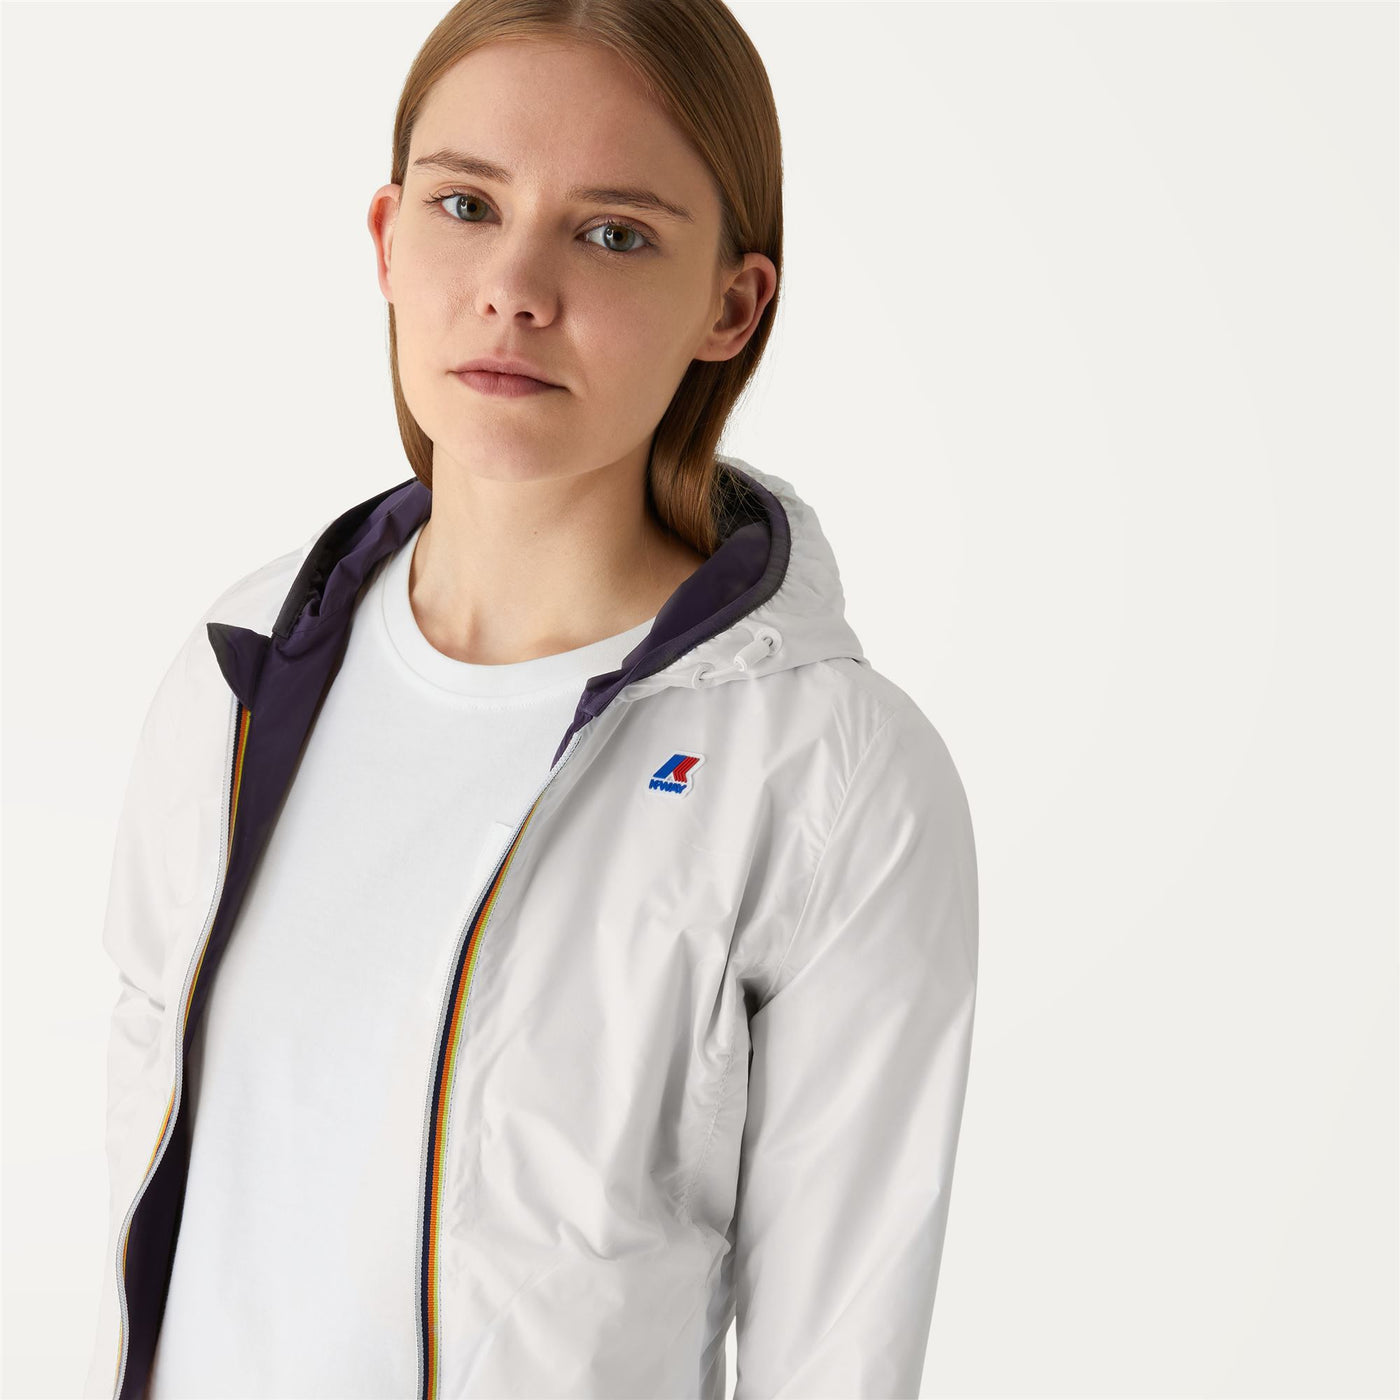 Jackets Woman LILY PLUS.2 DOUBLE Short VIOLET - WHITE | kway Detail Double				